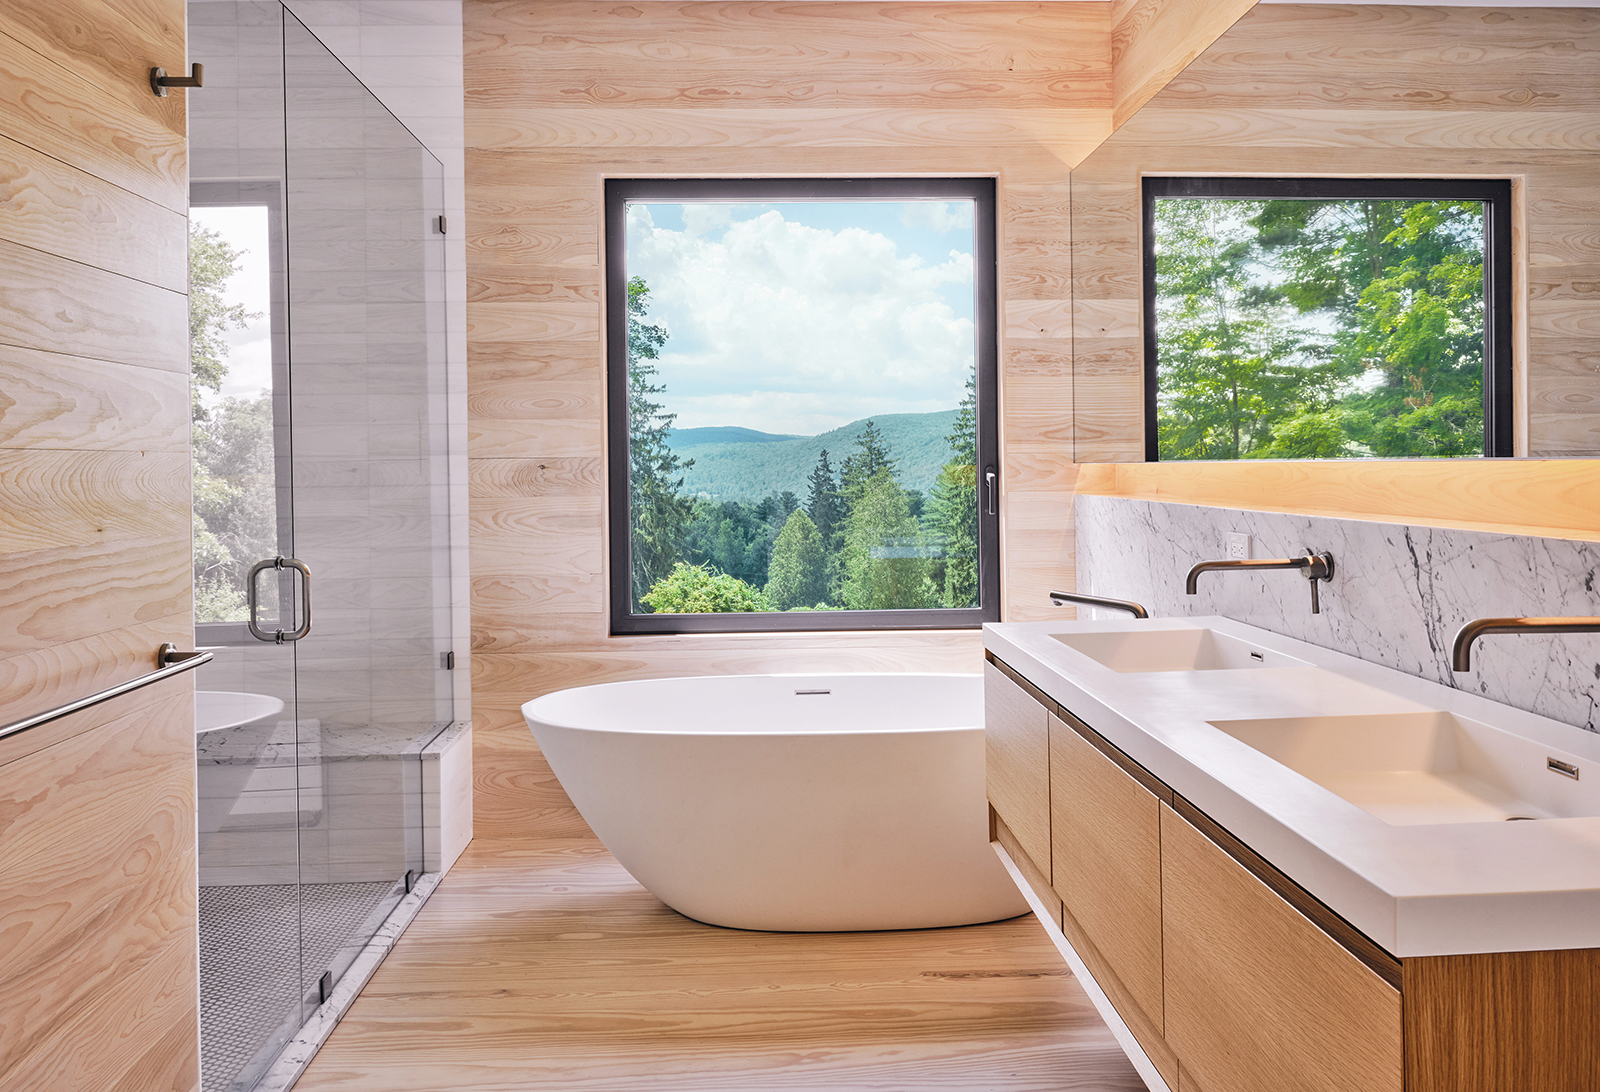 bathroom photo from passive house interior design project with window view looking out to mountains